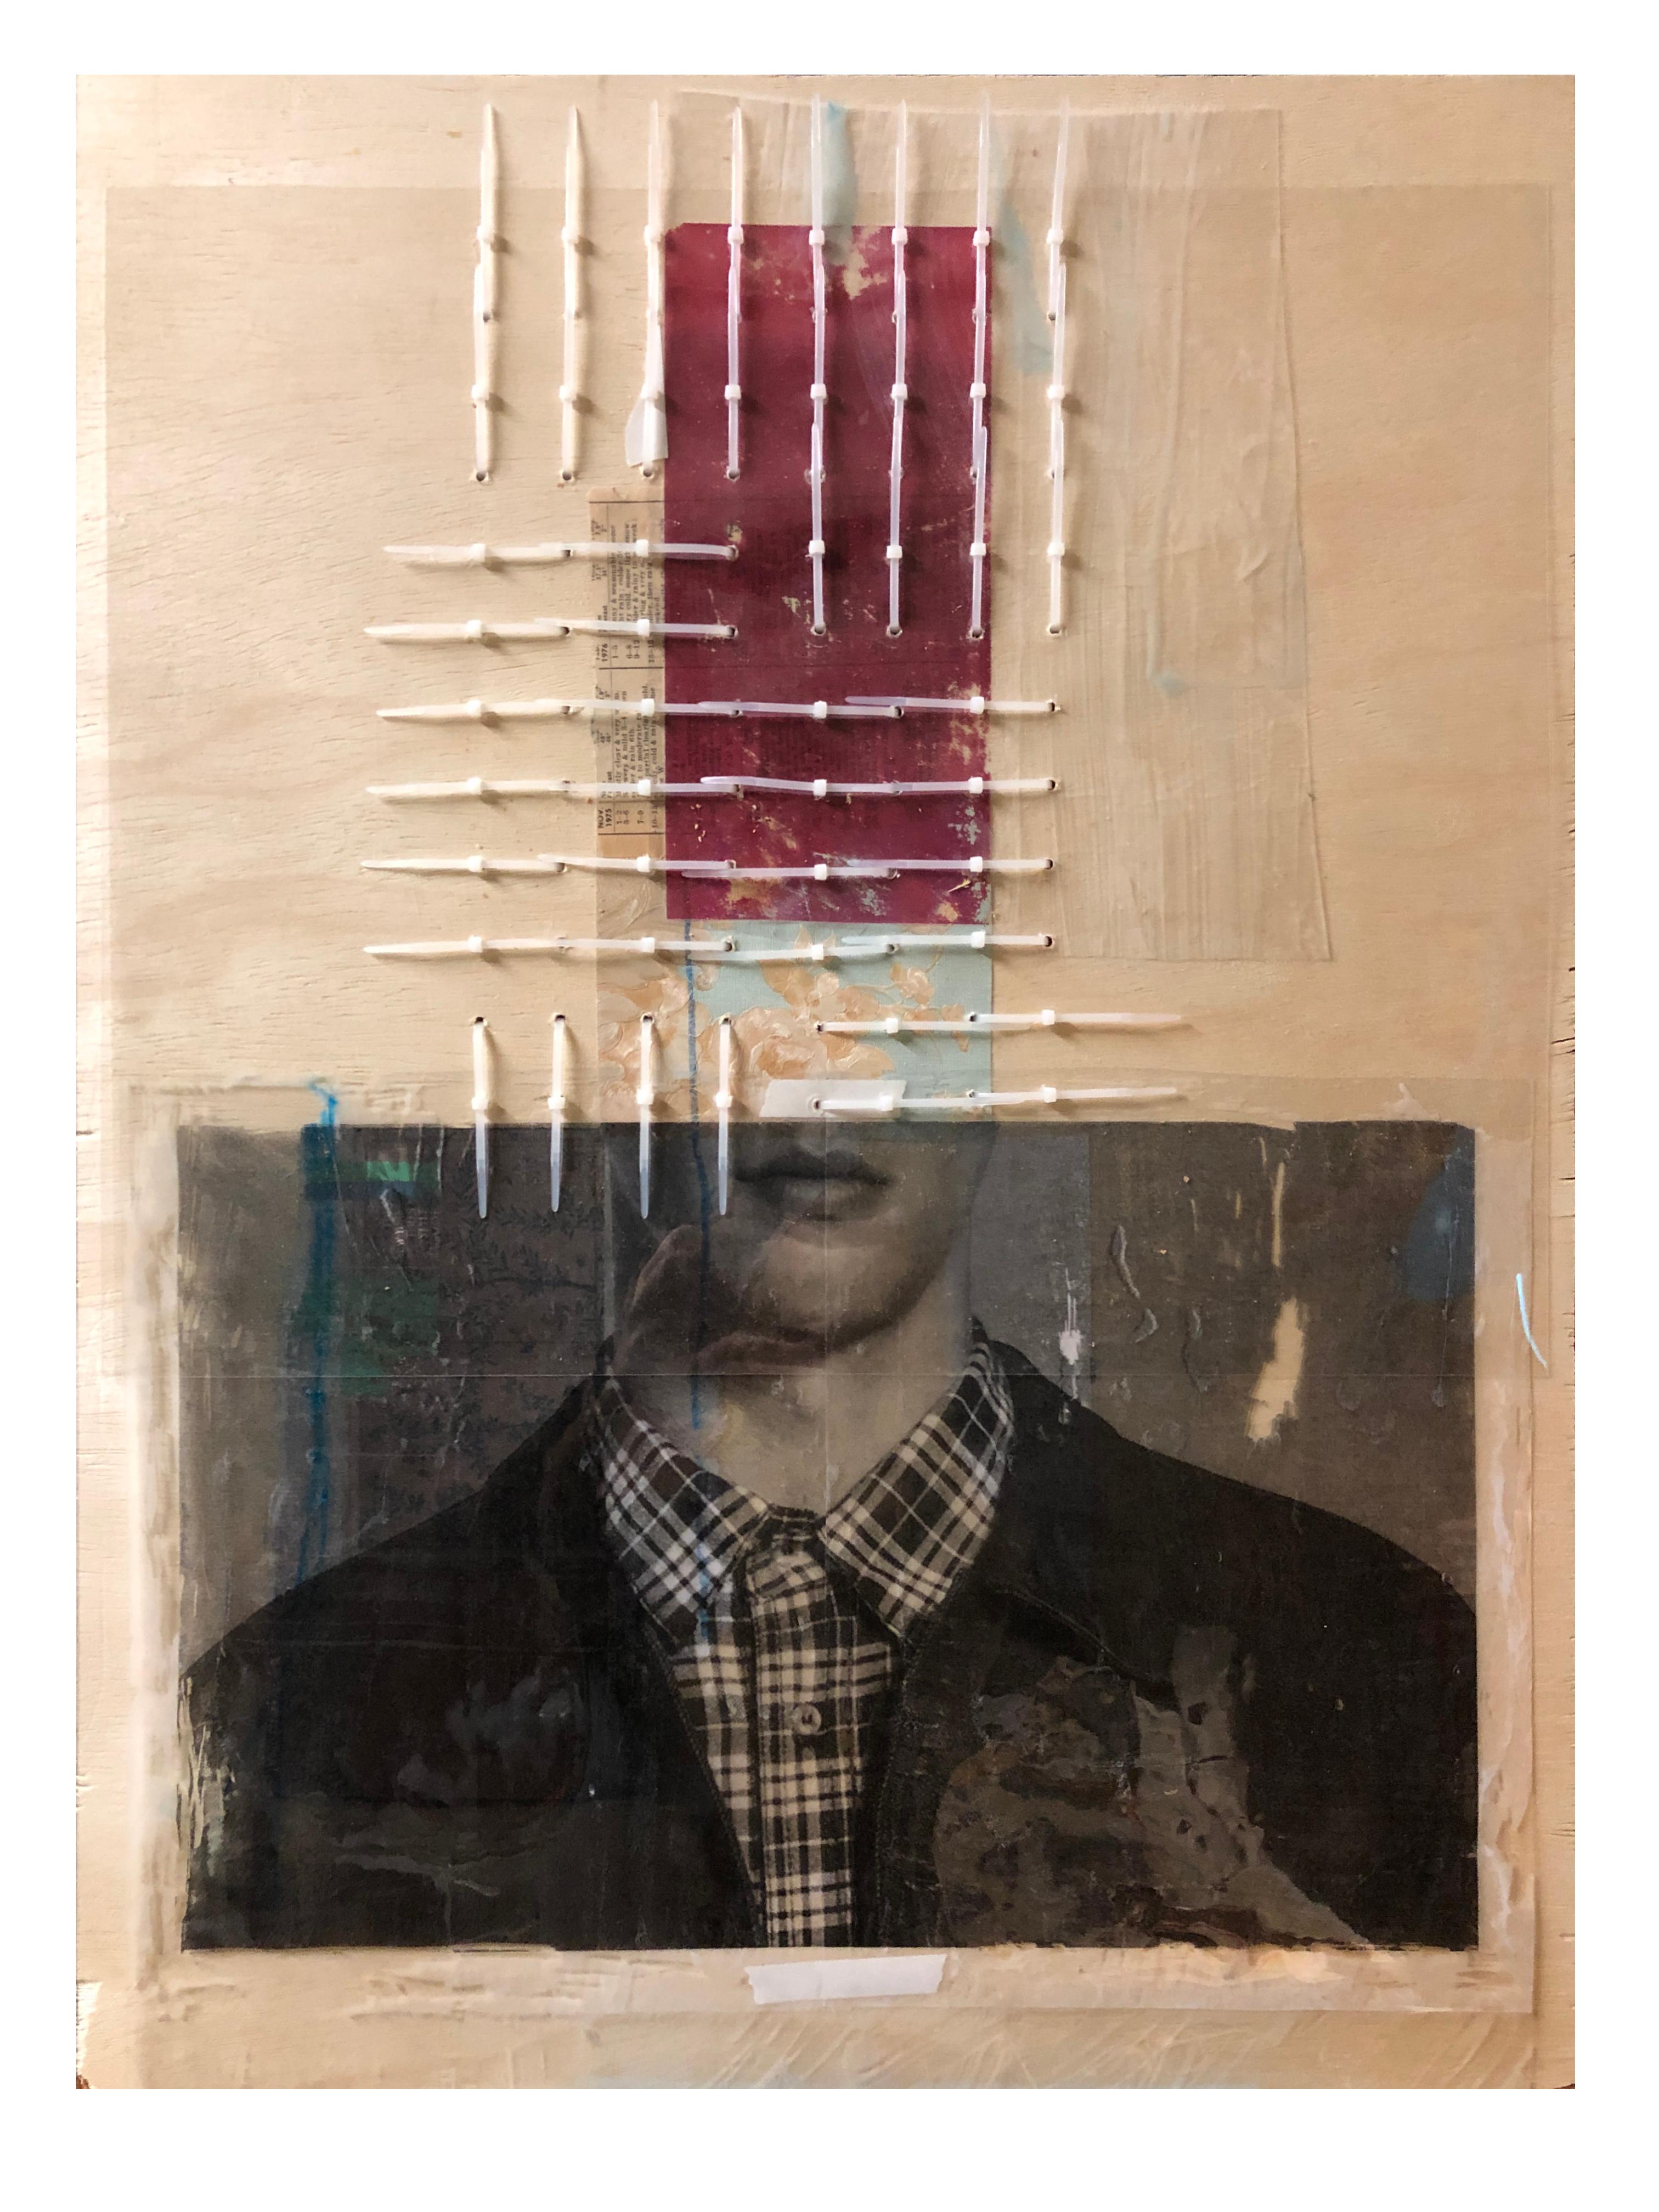 Untitled. Collage. Portrait Mixed Media. - Mixed Media Art by Roberto Fonfria